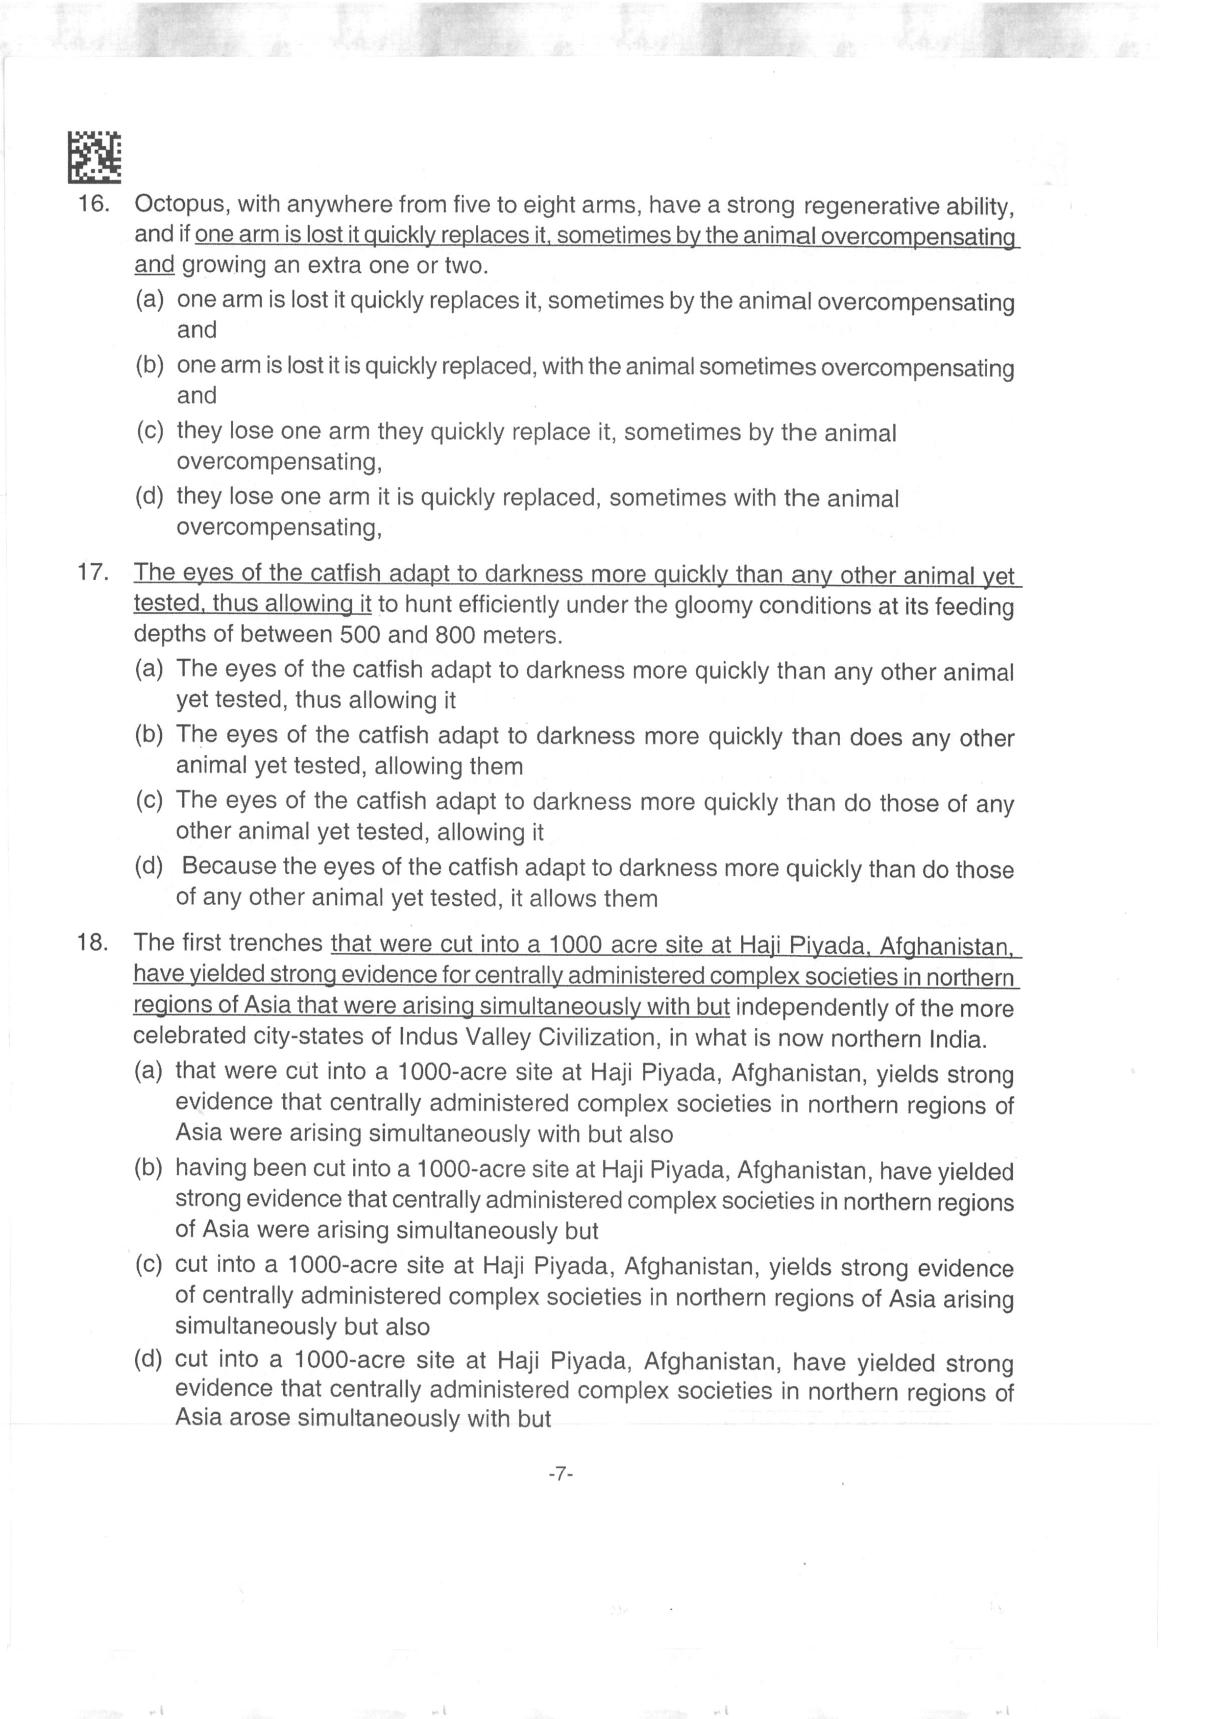 AILET 2019 Question Paper for BA LLB - Page 7